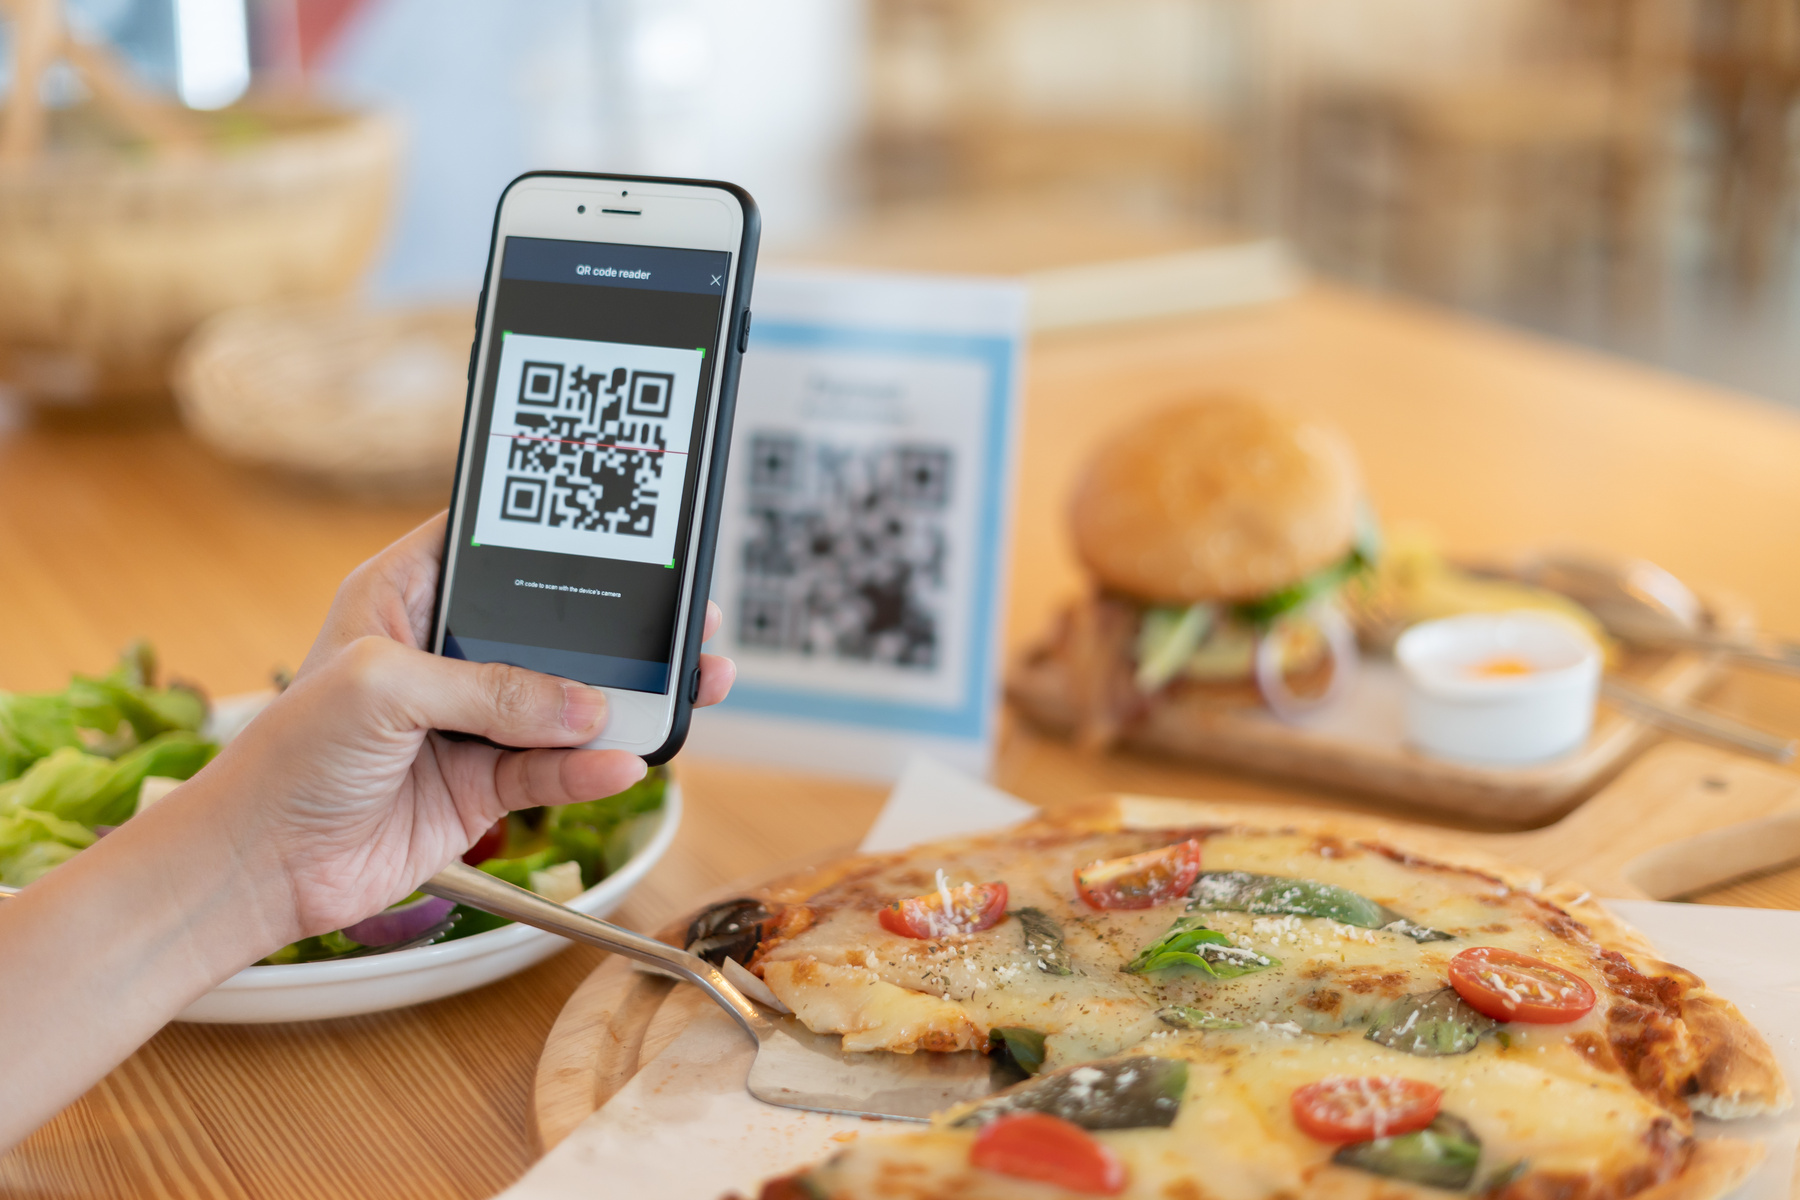 Woman use smartphone to scan QR code to pay in cafe restaurant w